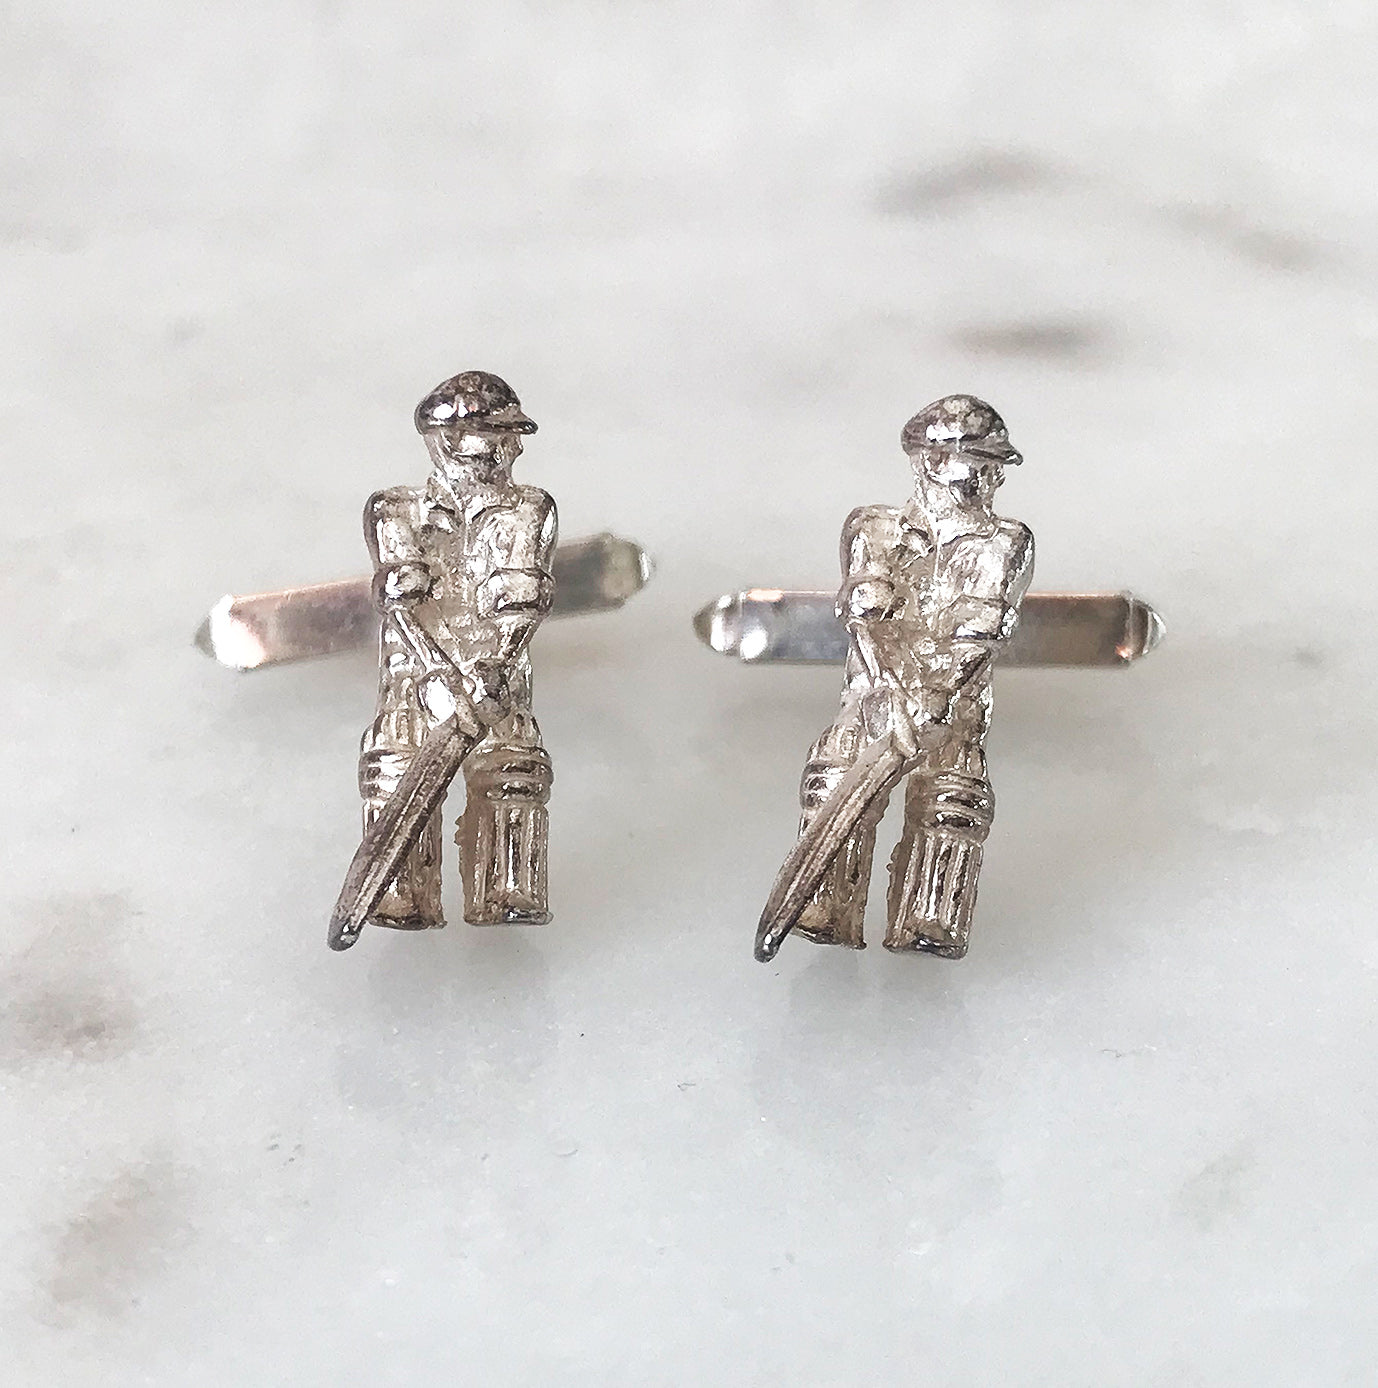 Sterling Silver, Cricketer Cufflinks. Ideal gift for the cricket nut! - SHOP NOW - www.intovintage.co.uk